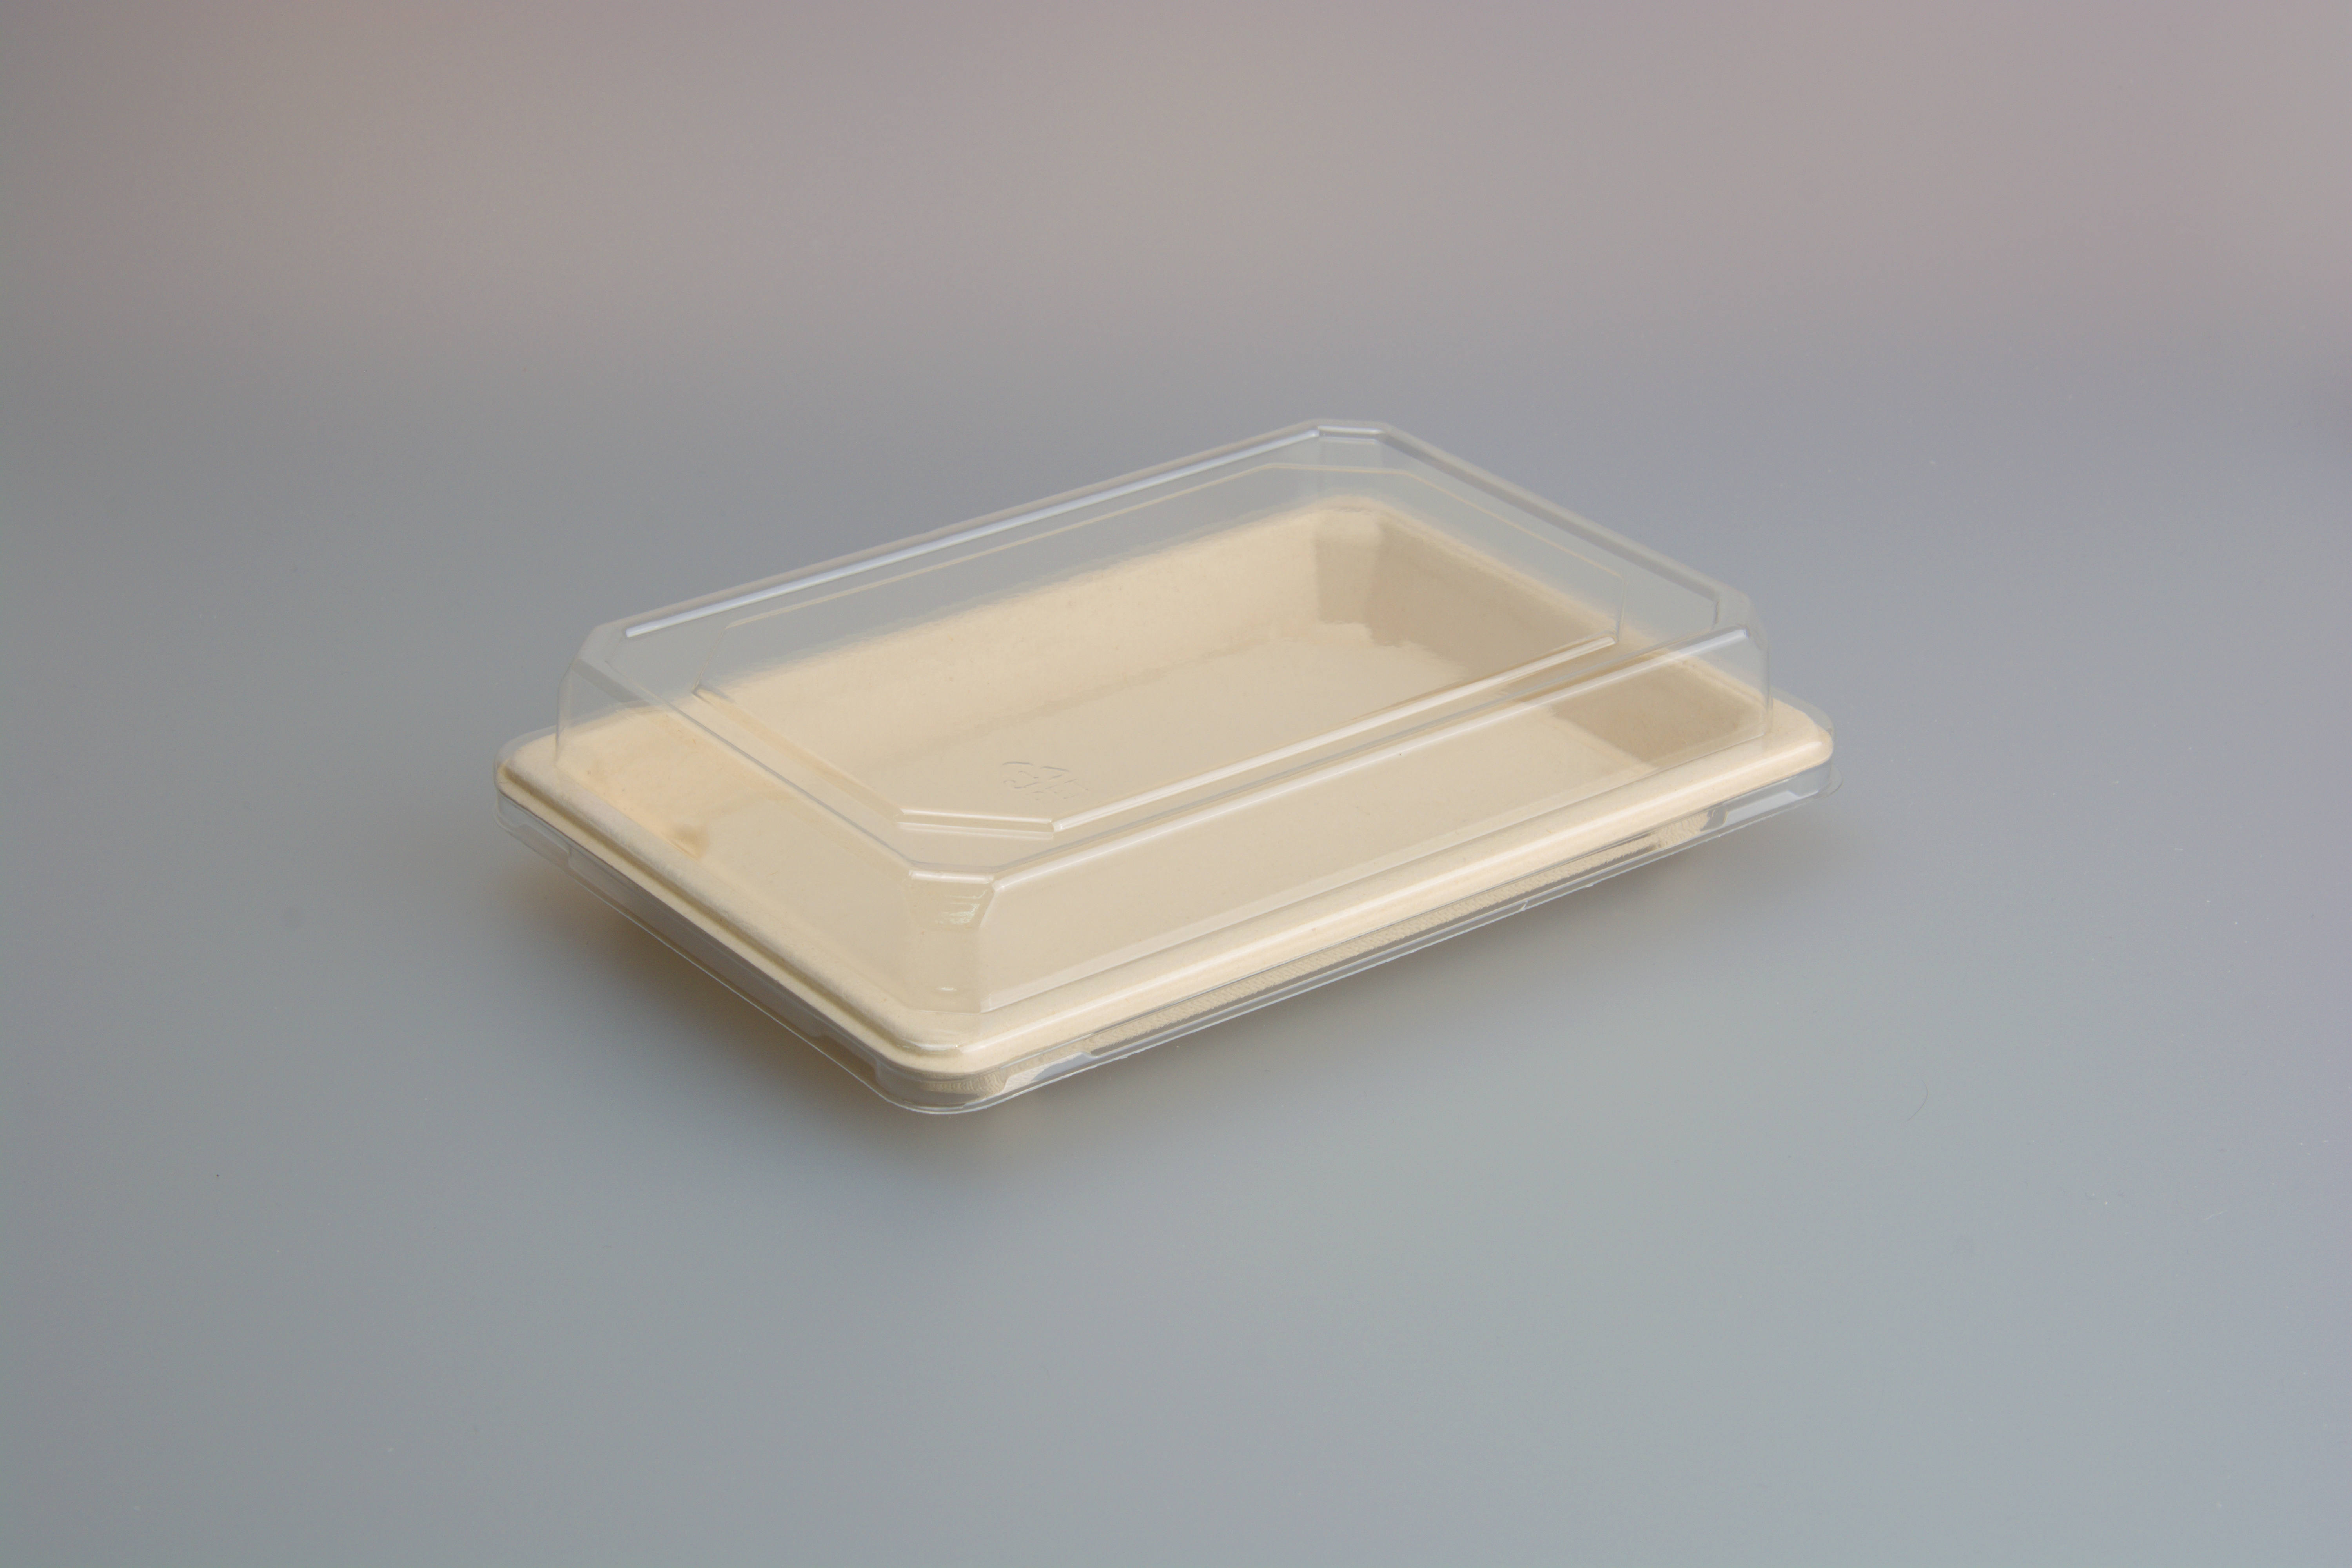 OEM Manufacturer Bagasse Disposable Lunch Box - 7.3*5.0 INCH Sushi Trays, Disposable Sushi Containers With Lids – Short, Take Out Containers For Appetizers, Entrees, or Desserts, Black Plast...